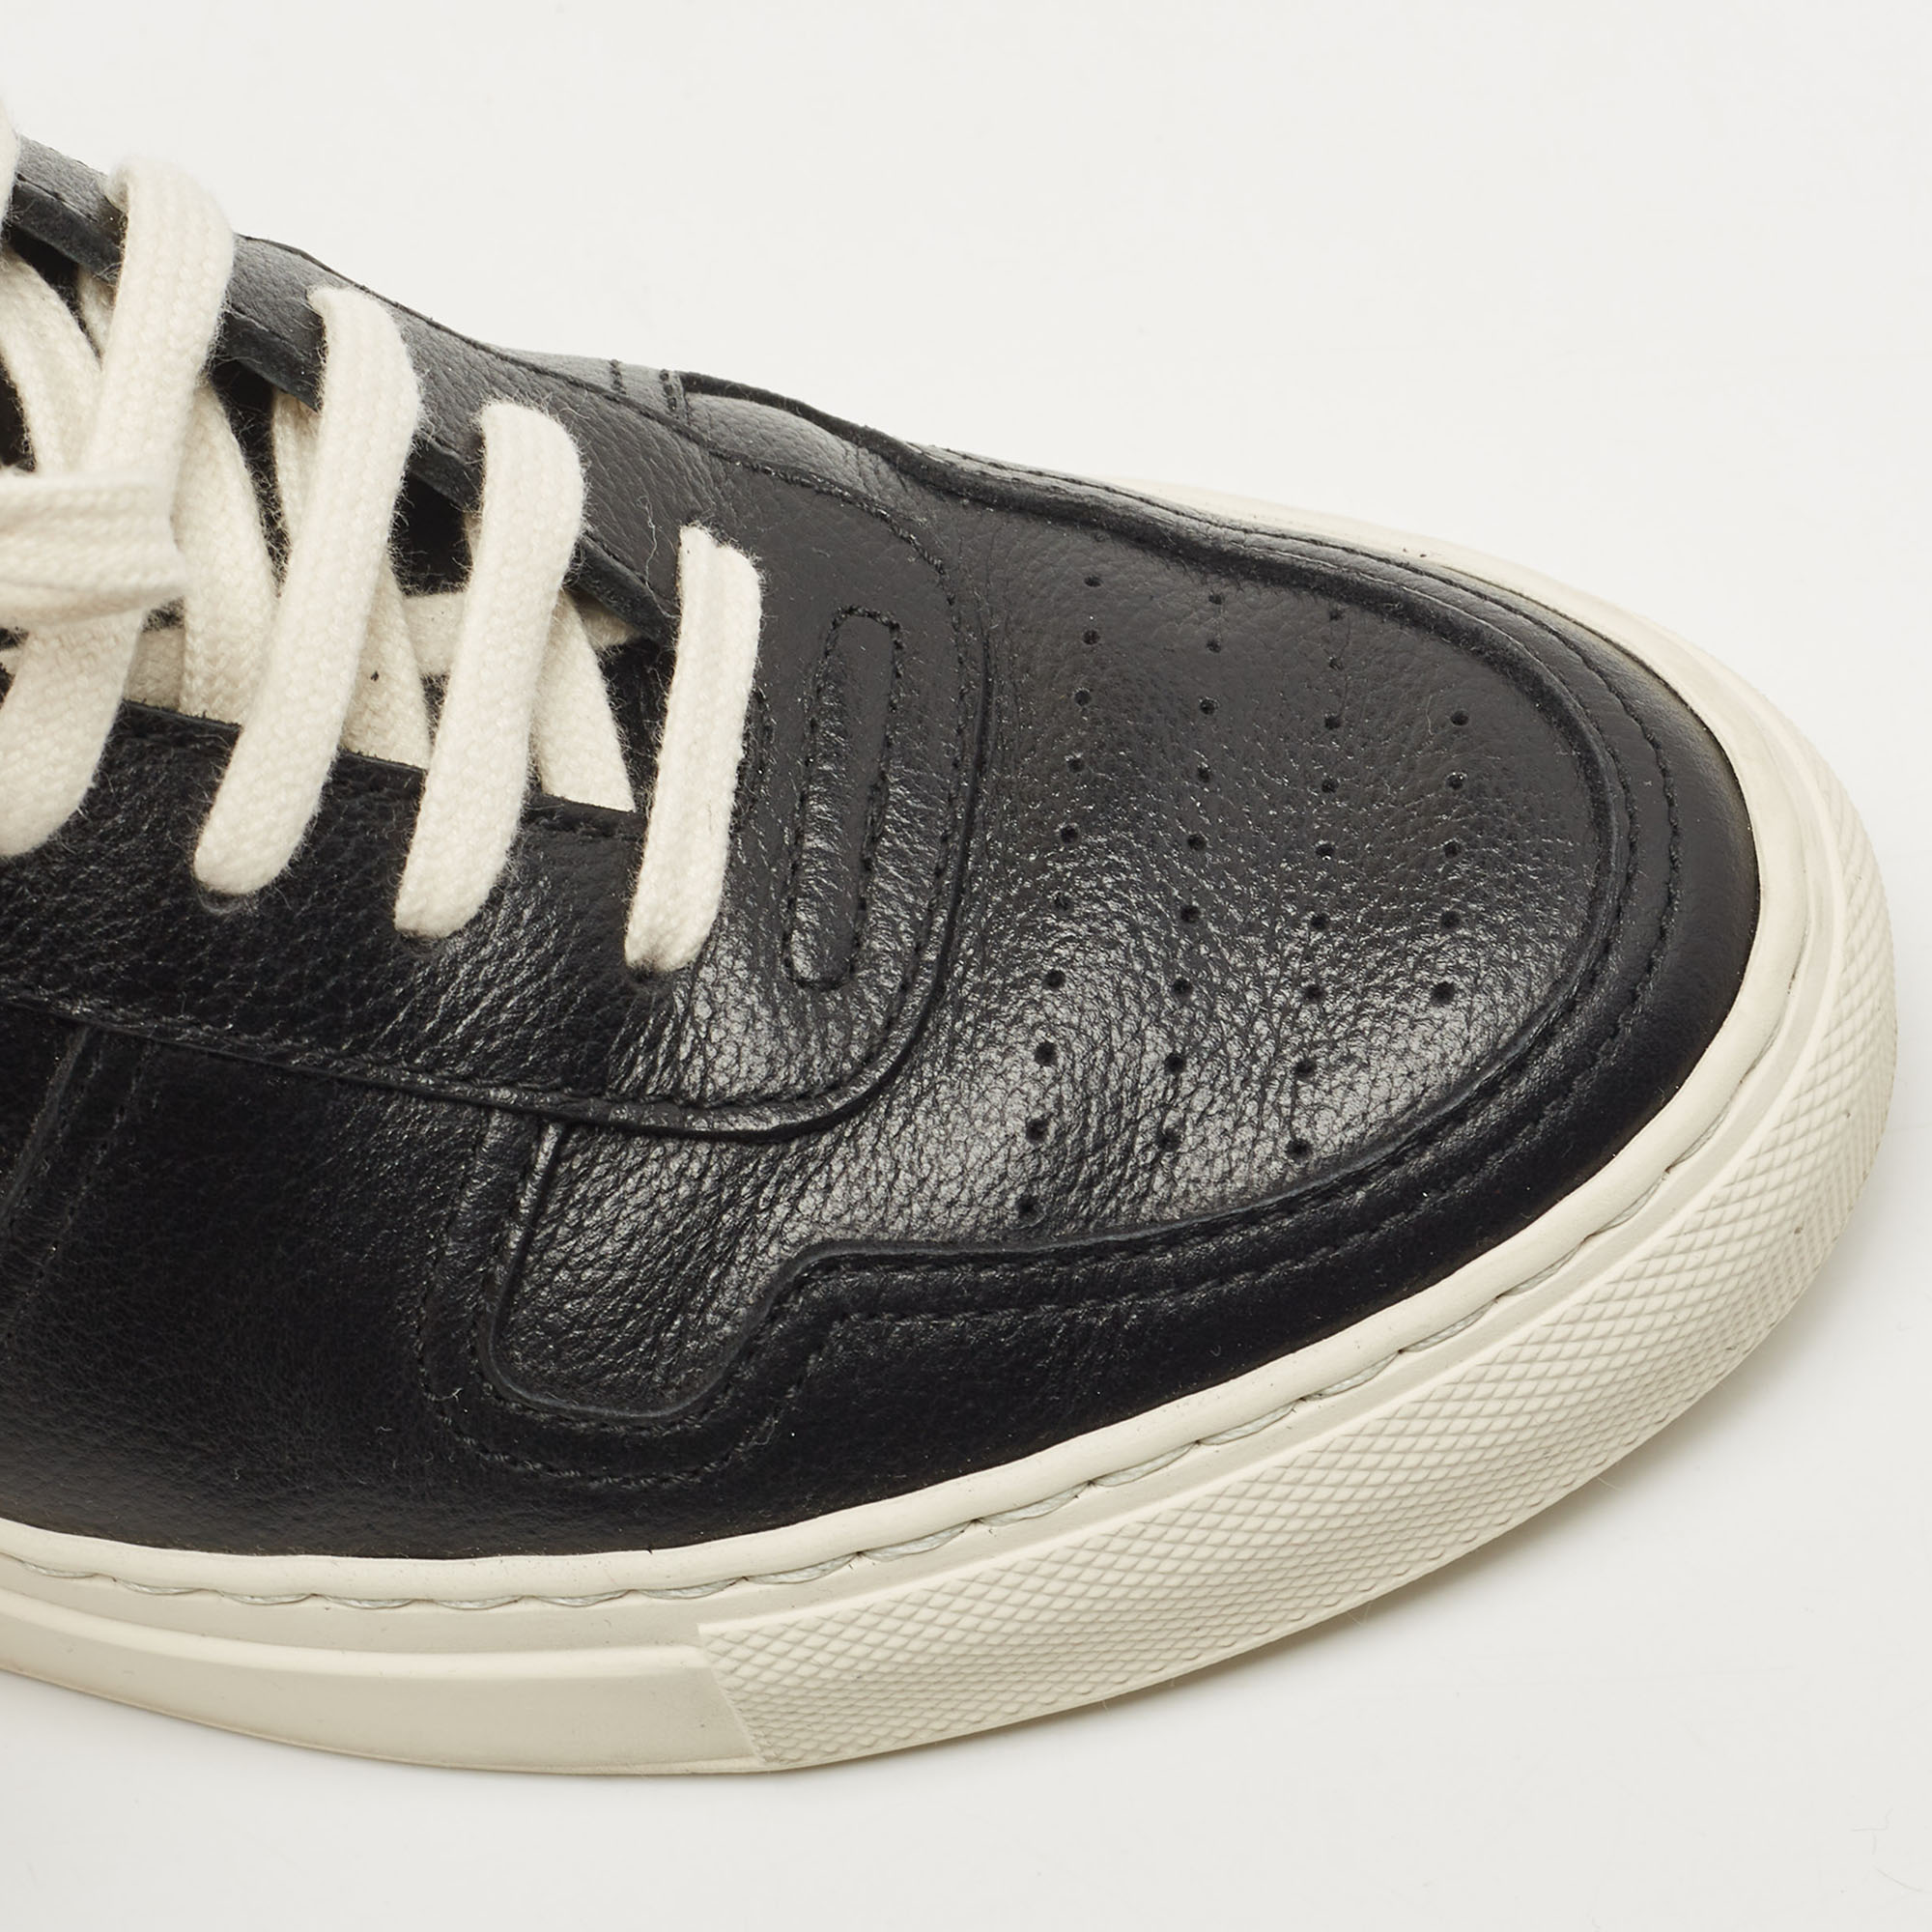 Common Projects Black Leather Bumby Low Top Sneakers Size 35